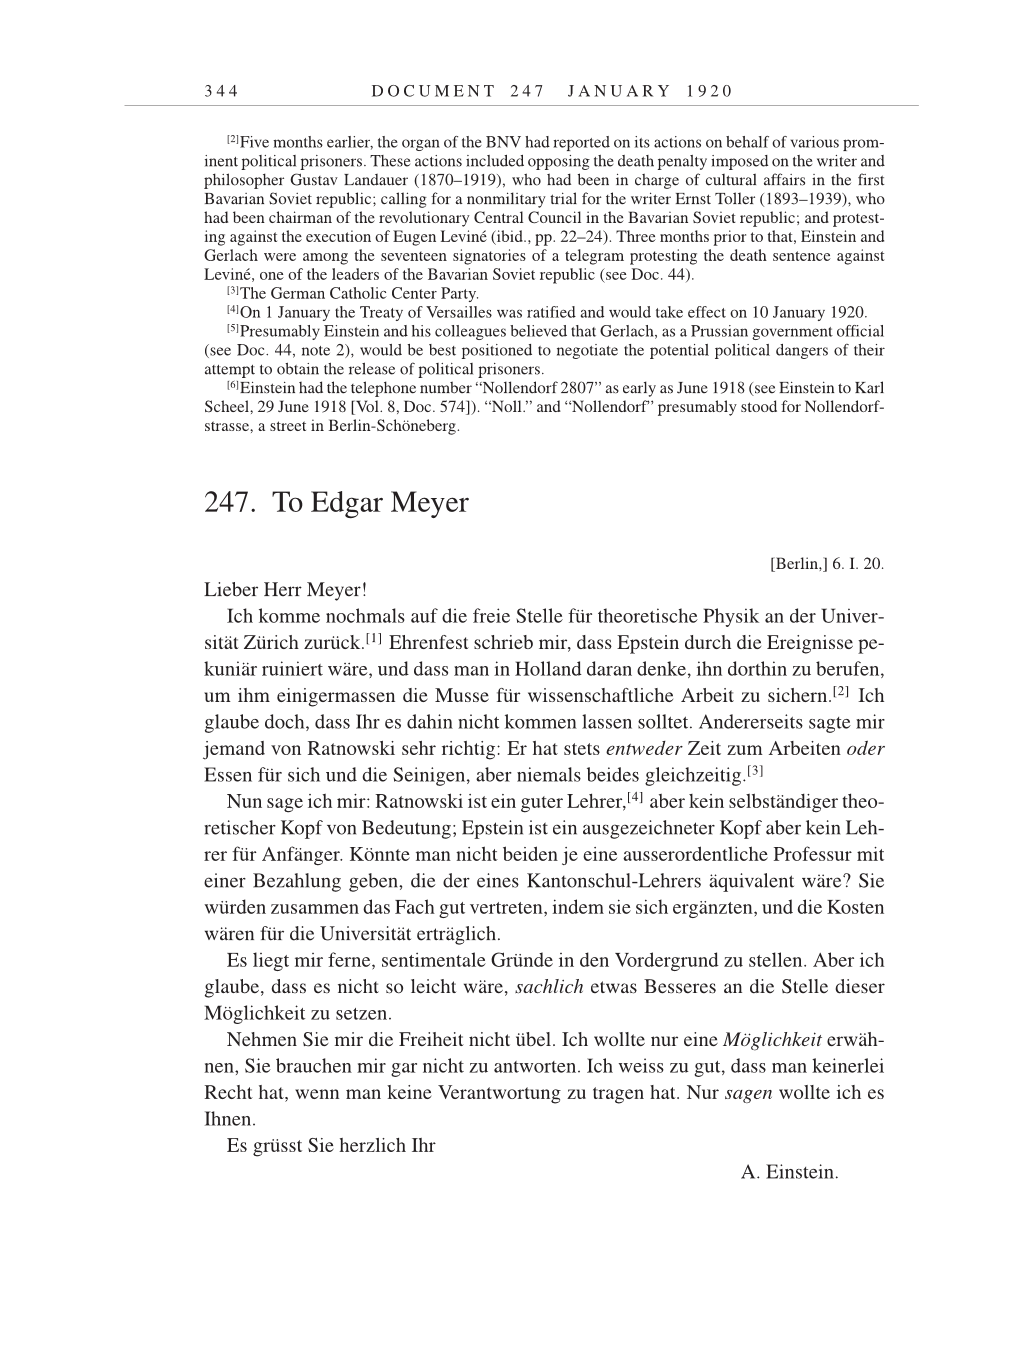 Volume 9: The Berlin Years: Correspondence January 1919-April 1920 page 344